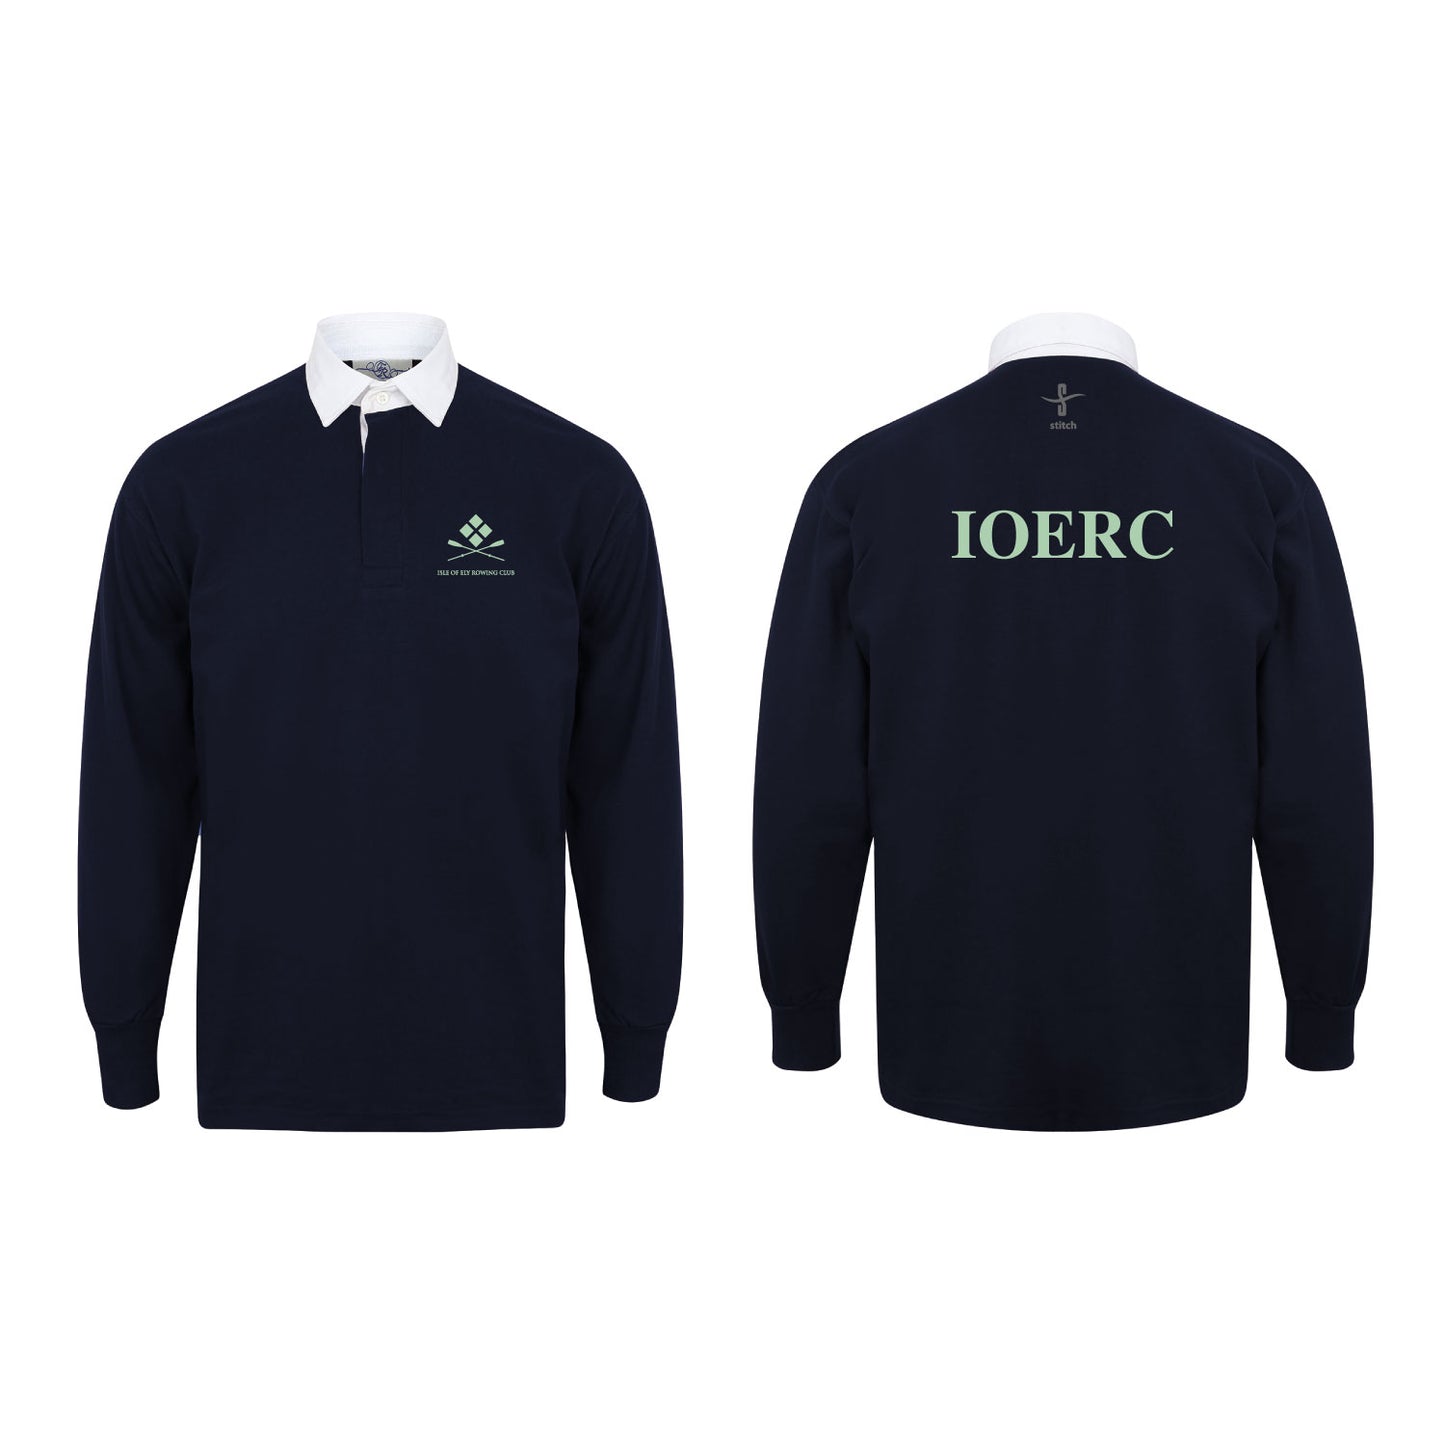 Isle of Ely Rowing Club Rugby Shirt